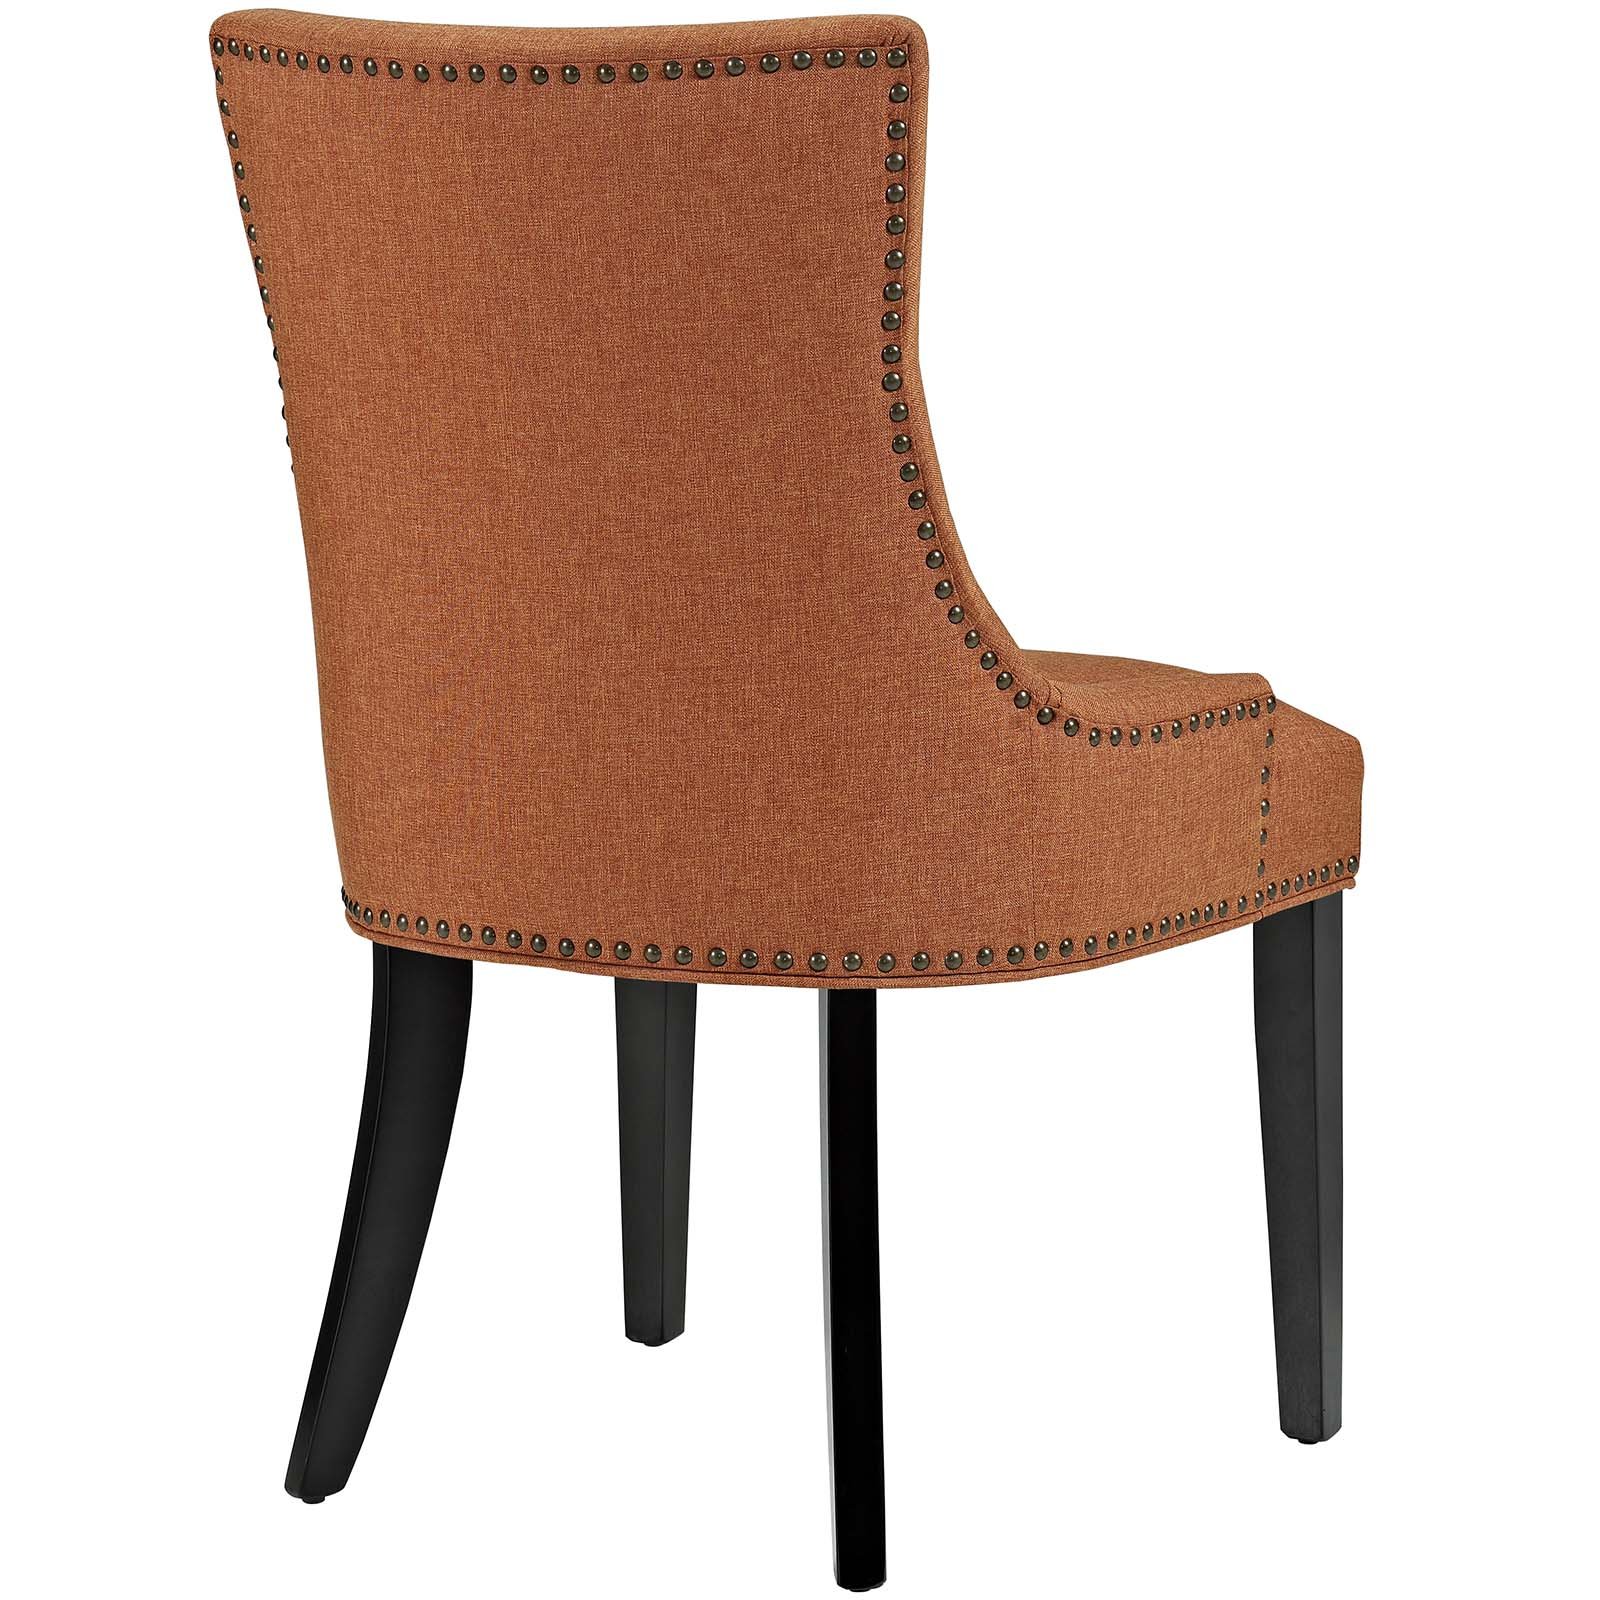 Modway Marquis Modern Upholstered Fabric Dining Chair with Nailhead Trim in Orange